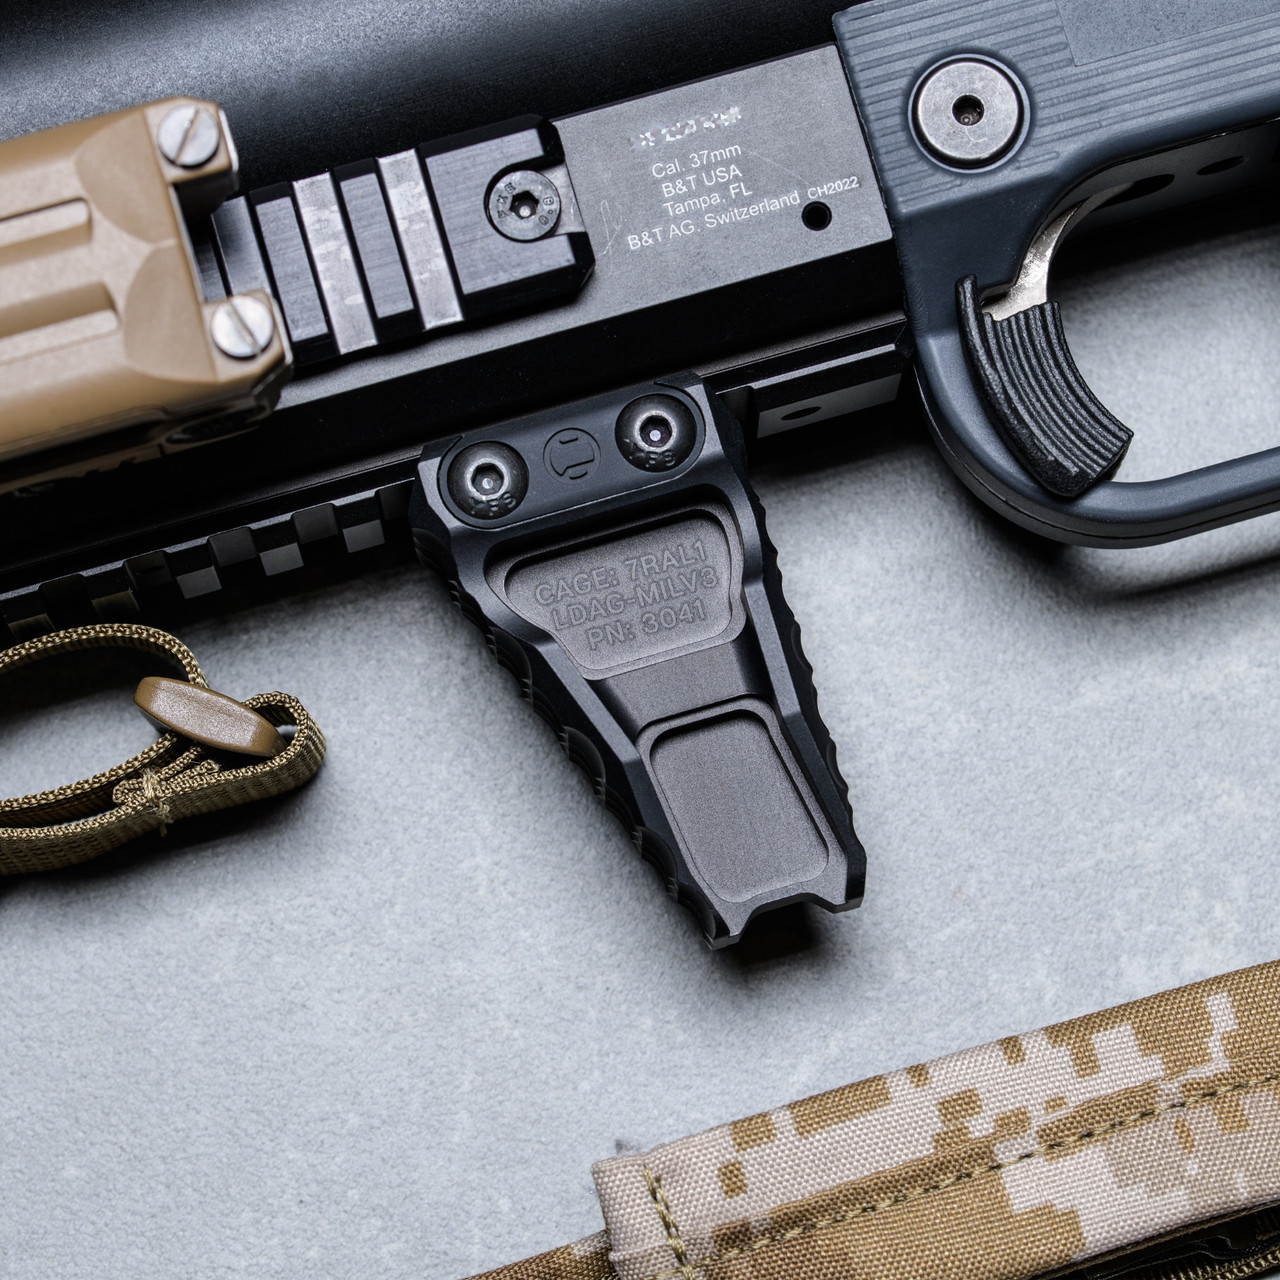 LDAG® AR-15 Foregrip - Made For Picatinny Rail Systems